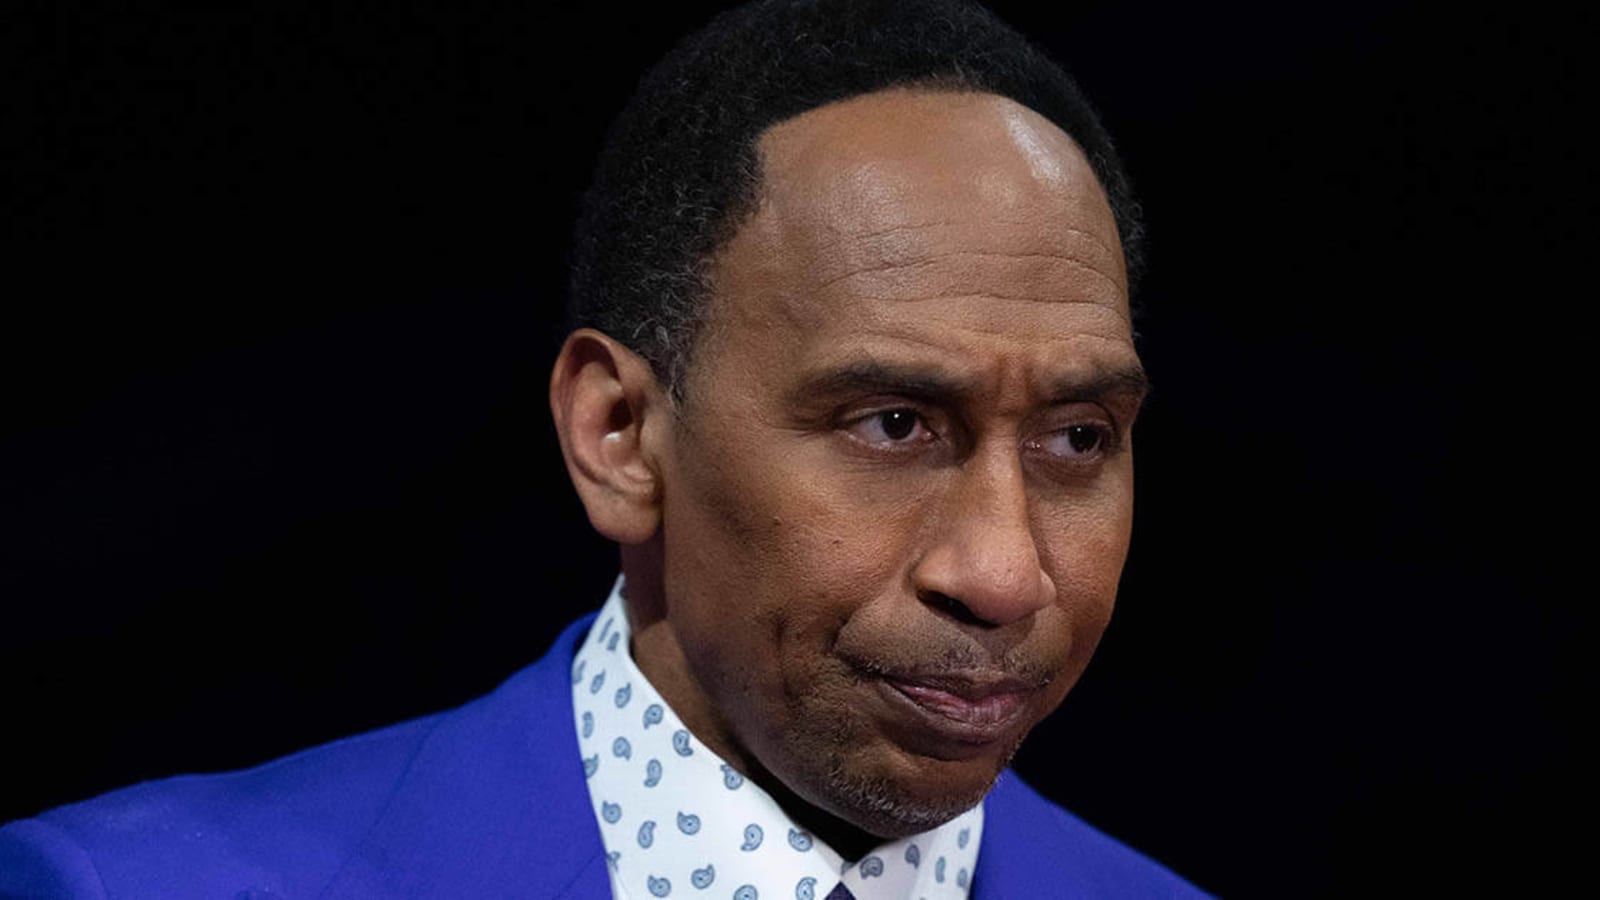 Stephen A. Smith says Michael Jordan delivered new shoes after ankle injury